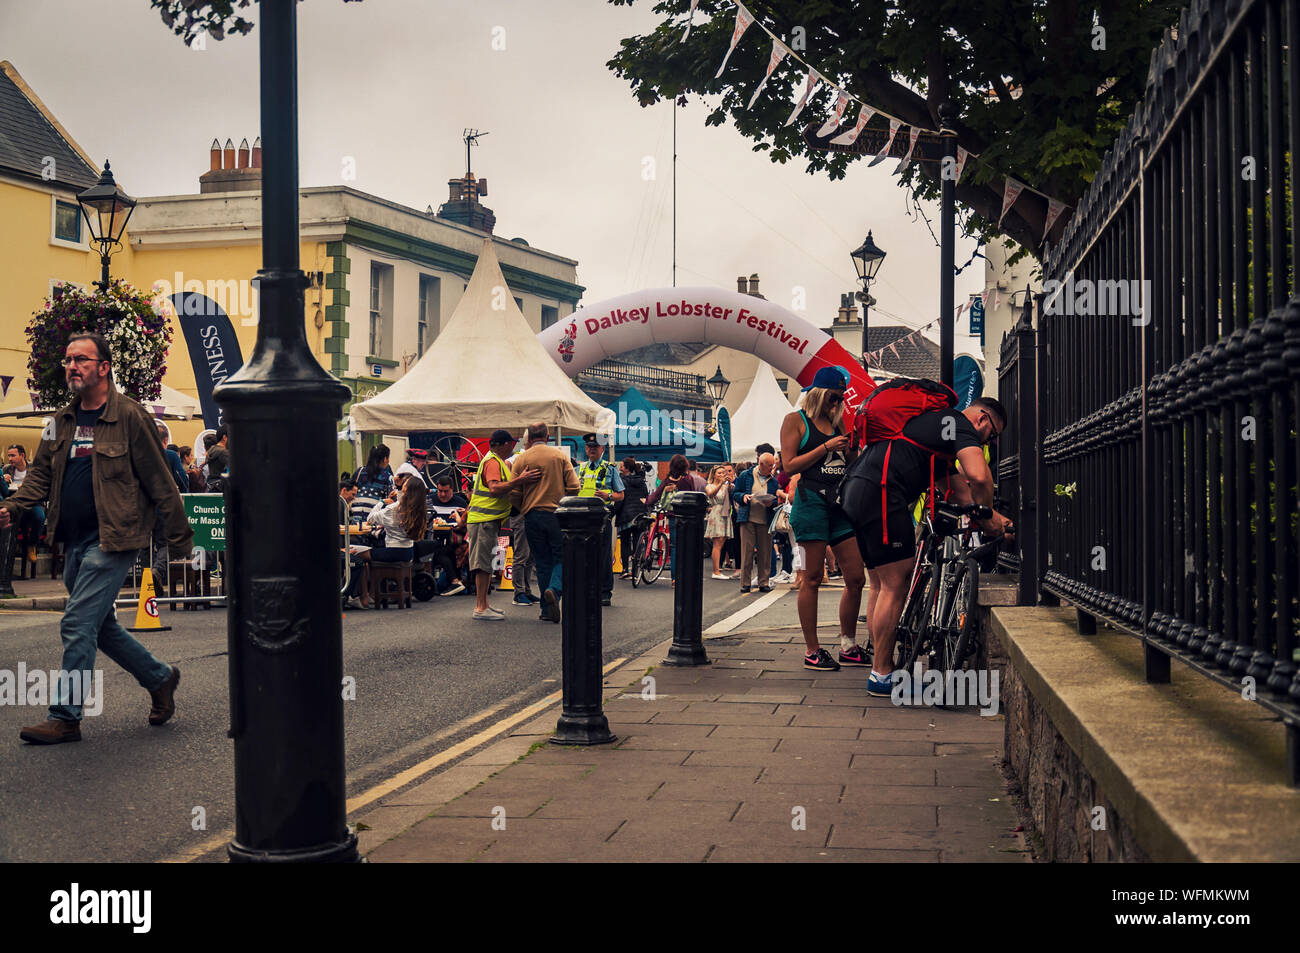 Тriumphal arch of the Festival.  Main gate to the Festival. Dalkey, Dublin, Ireland.25 August 2019.  Seafood “Dalkey Lobster Festival” Stock Photo